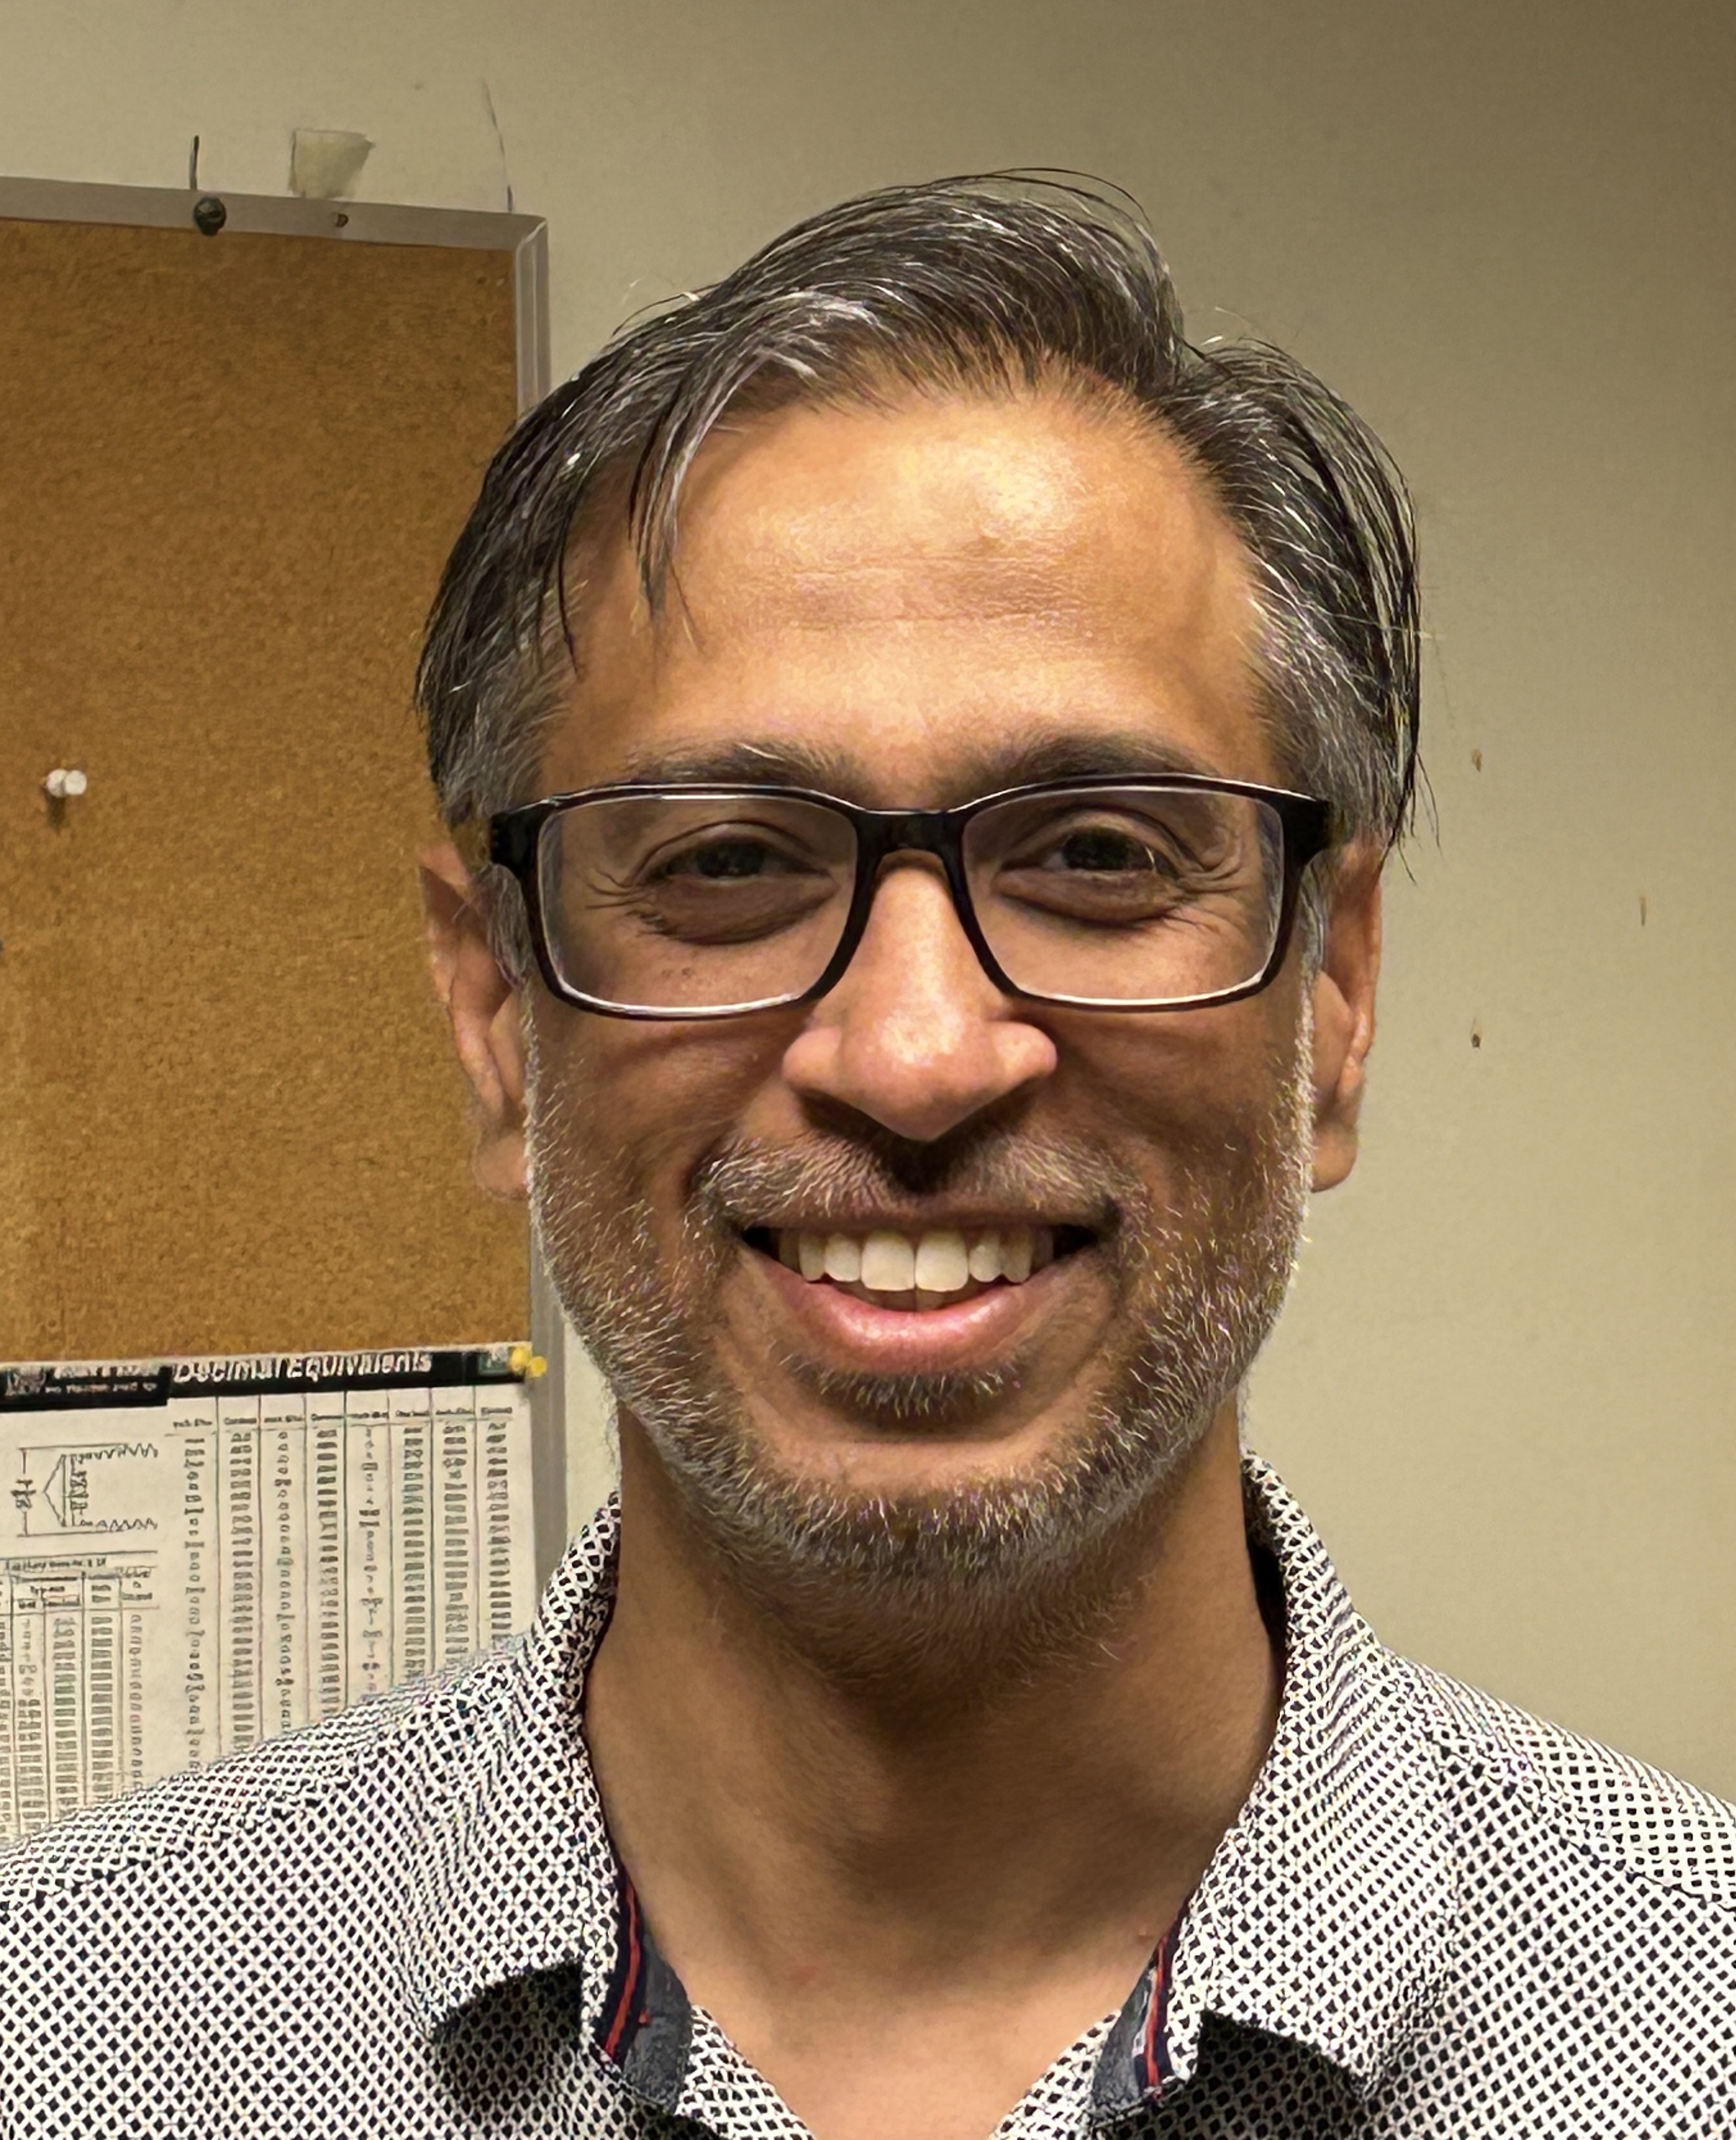 Headshot of Sumit smiling with a corkboard and tan wall in the background